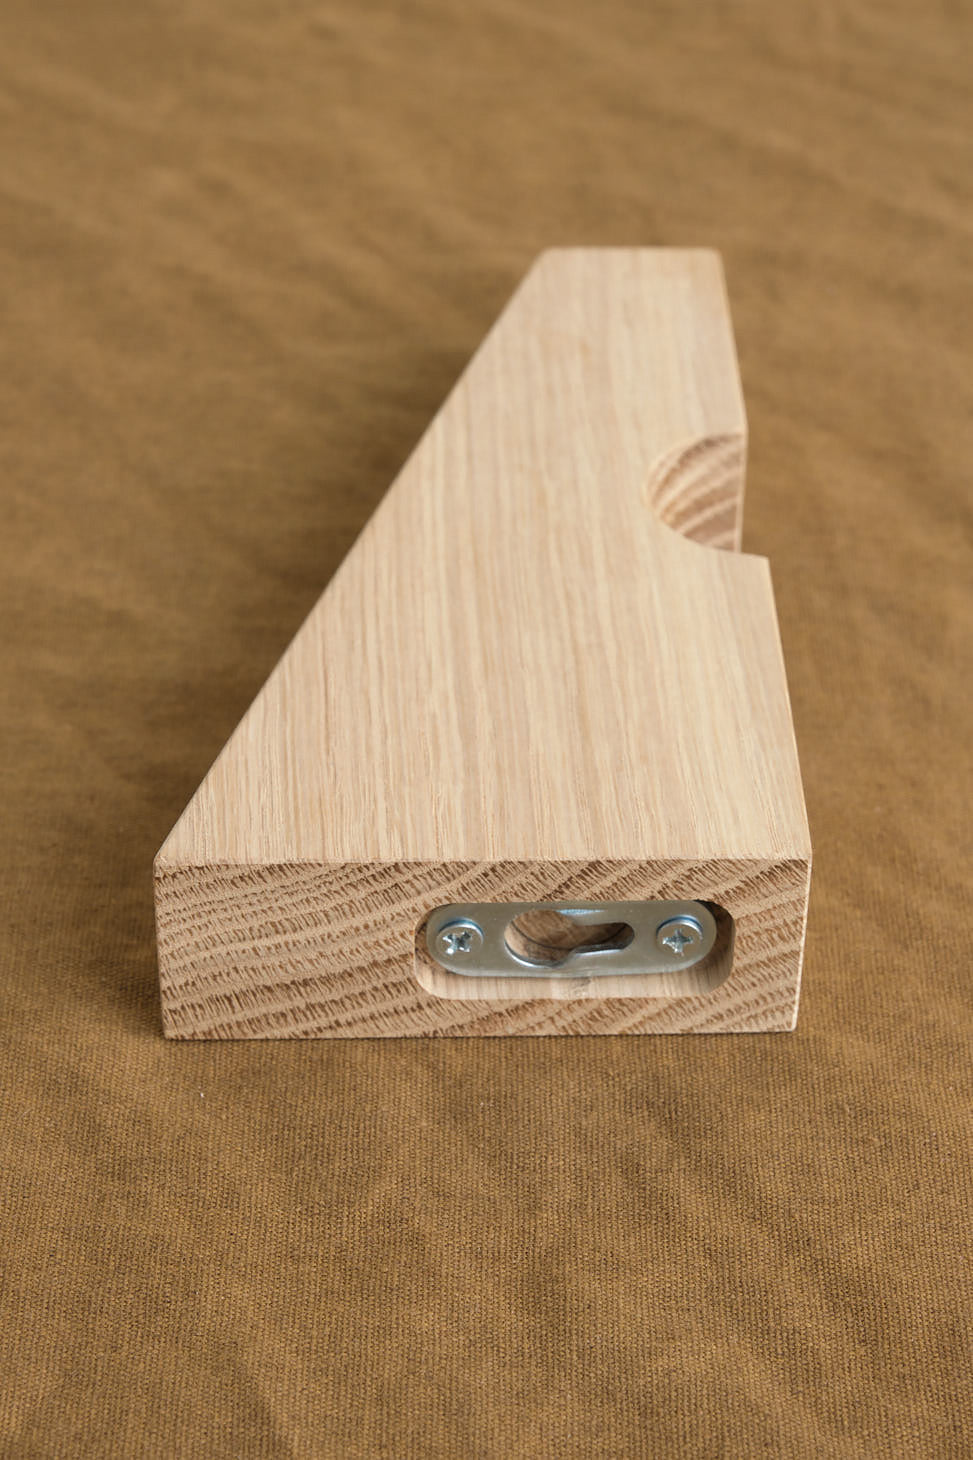 Back of Wood Square Notched Wall Mount Bracket